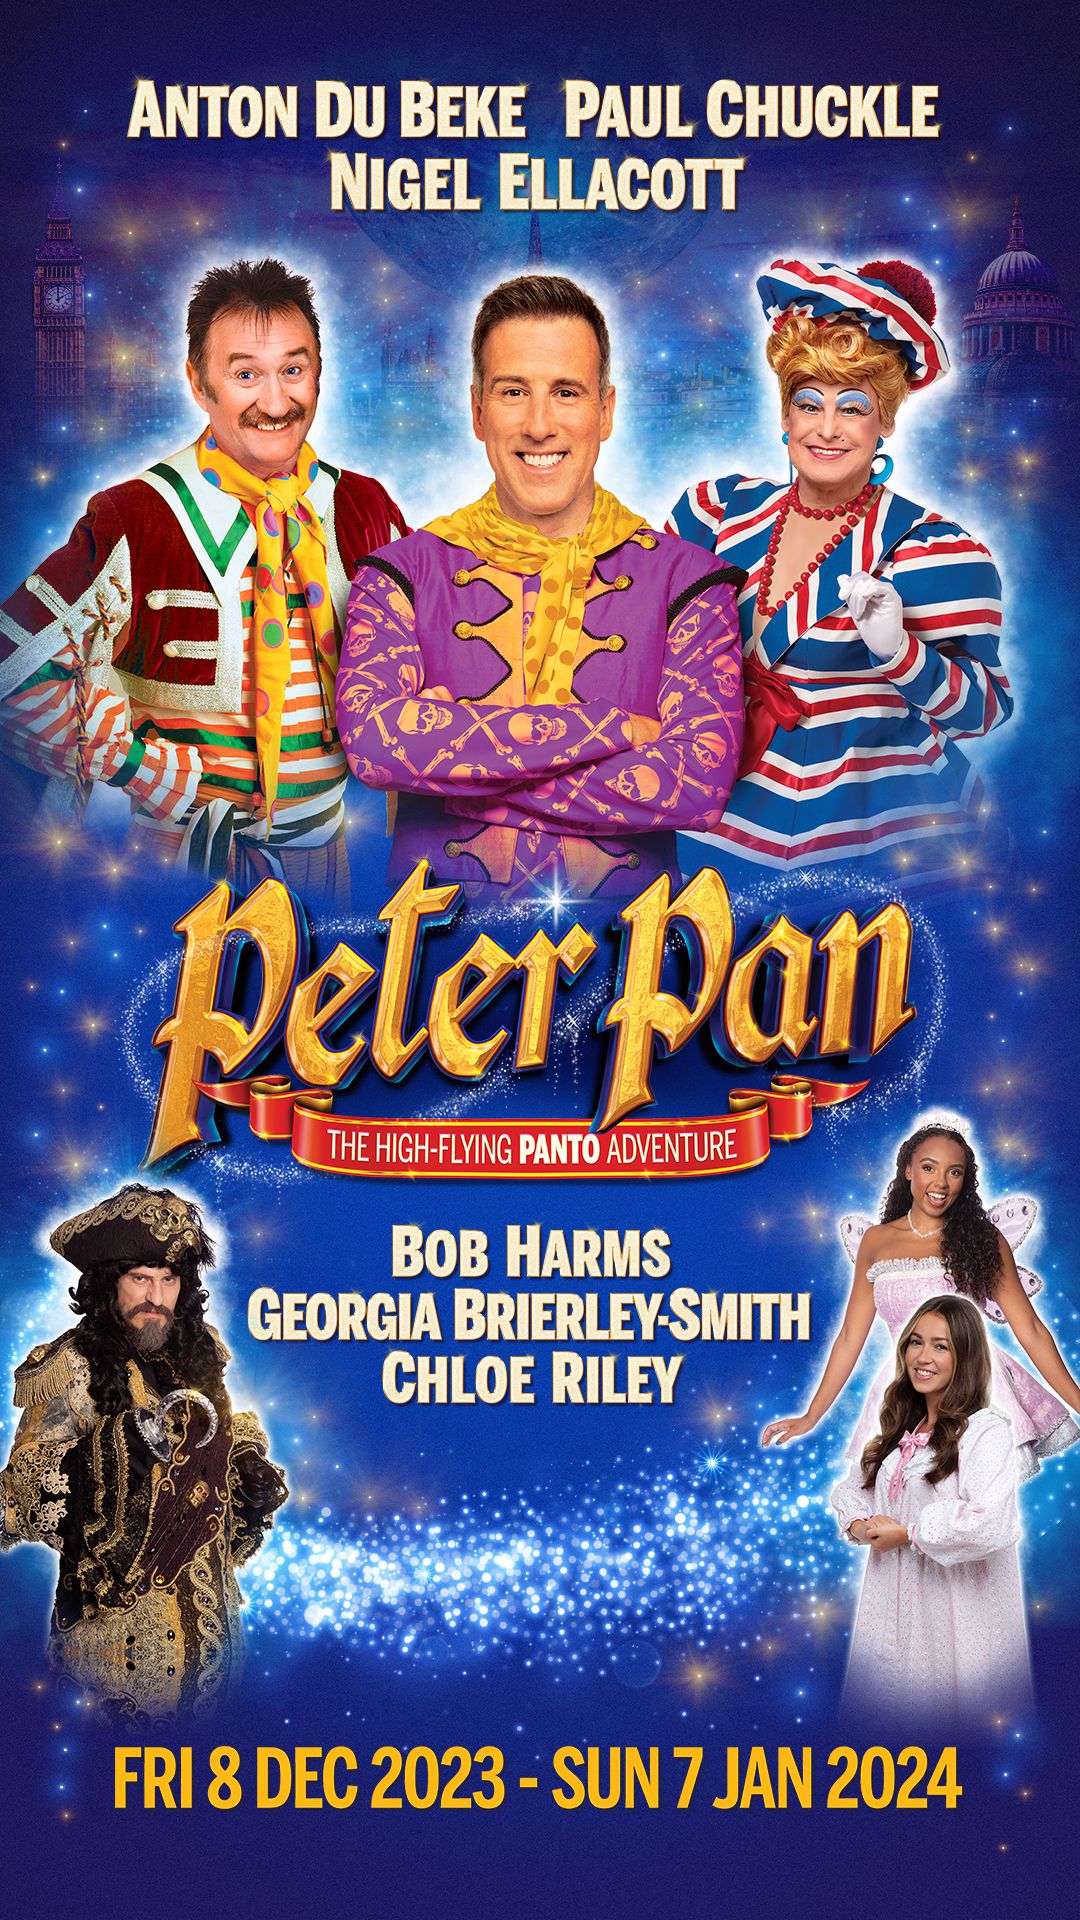 Peter Pan - Panto of the Year! - Essential Surrey & SW London